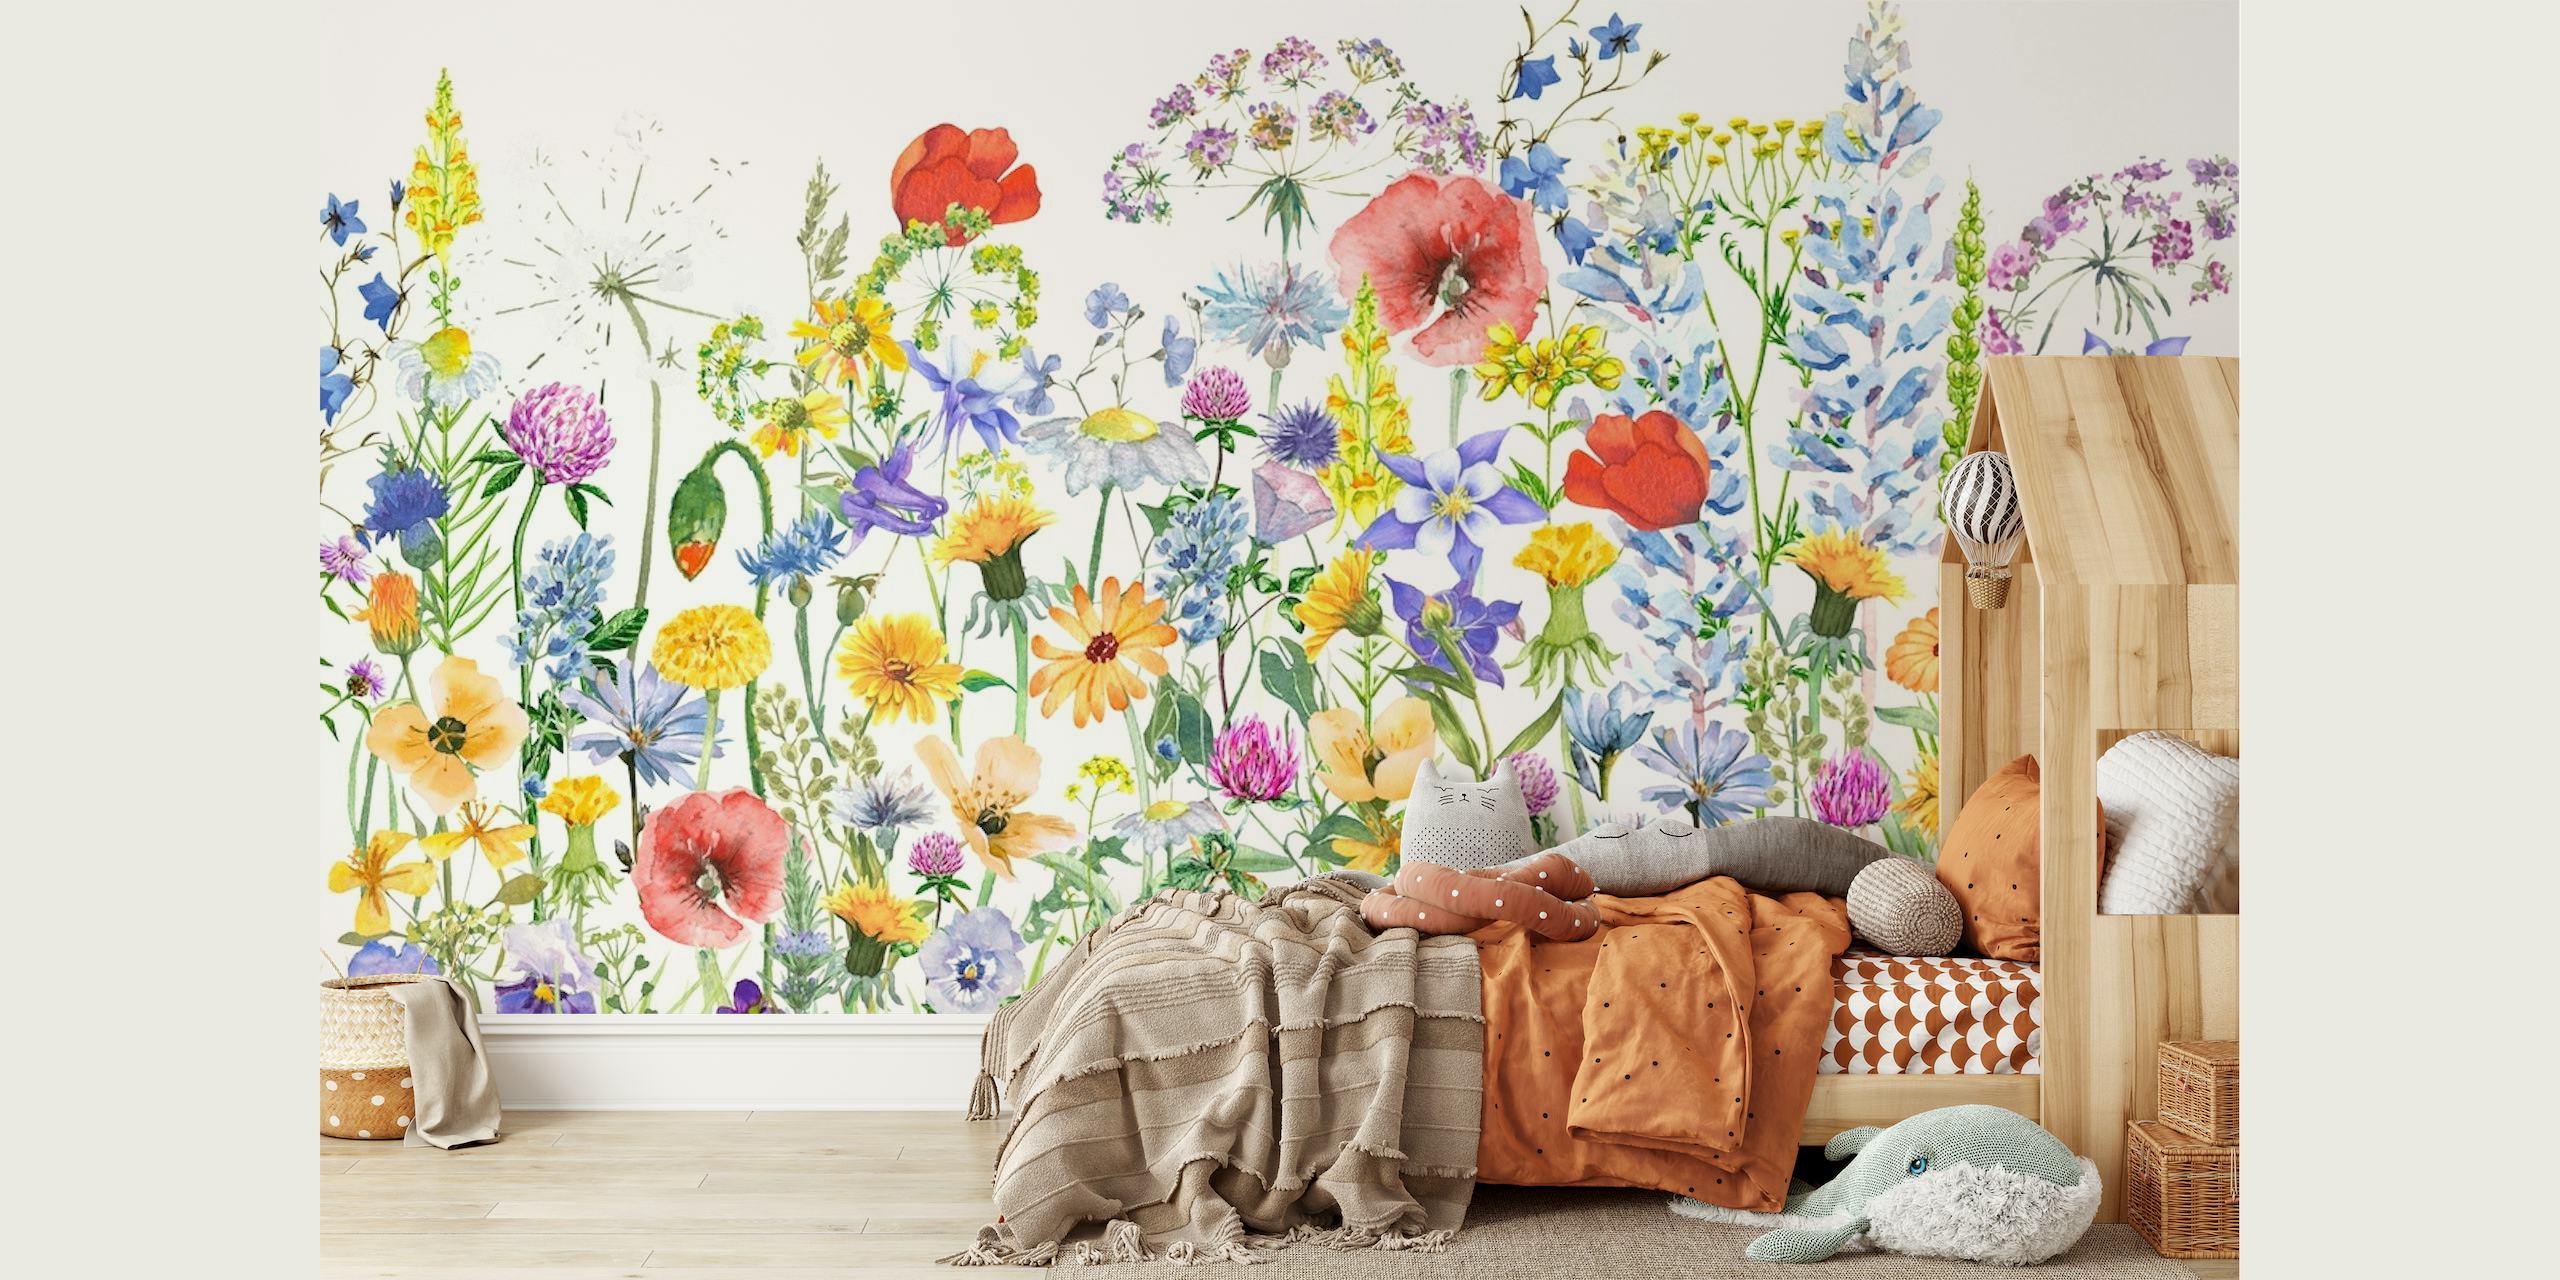 Scandinavian Wildflowers Garden wall mural with a variety of colorful flowers